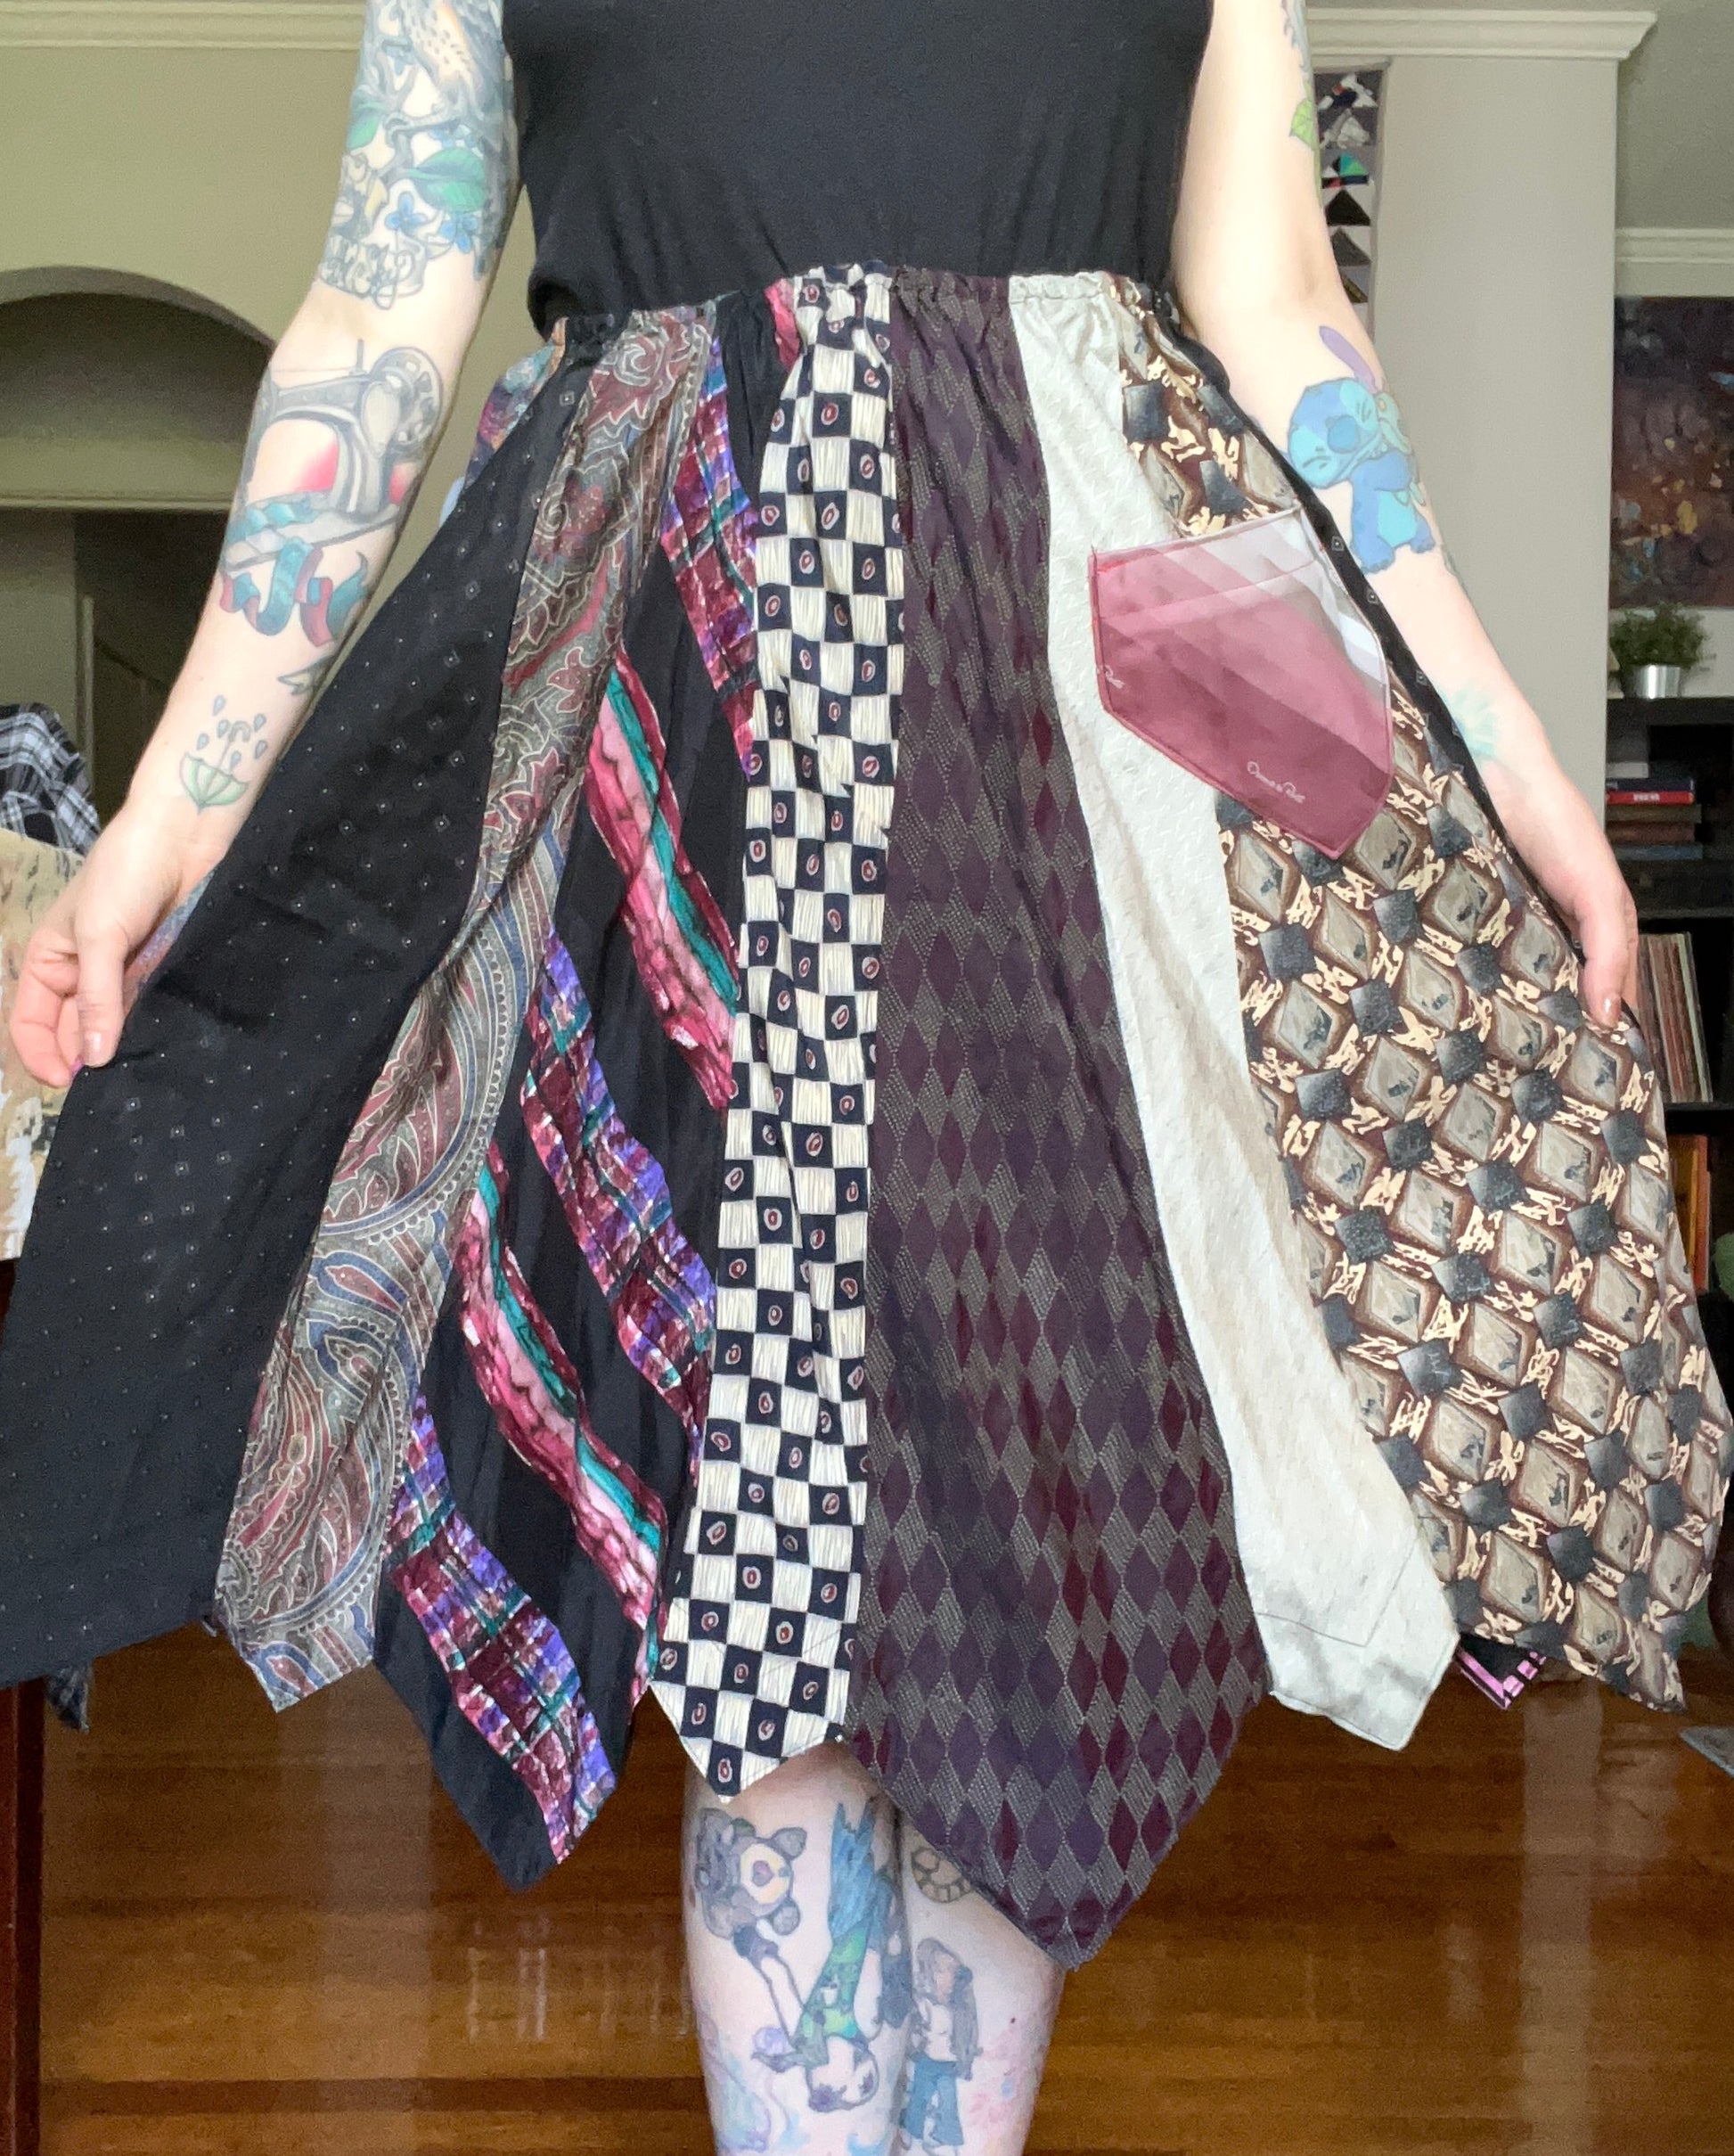 Skirt created out of neckties, as worn by tattooed model. It is held out at the sides to show fullness of the skirt